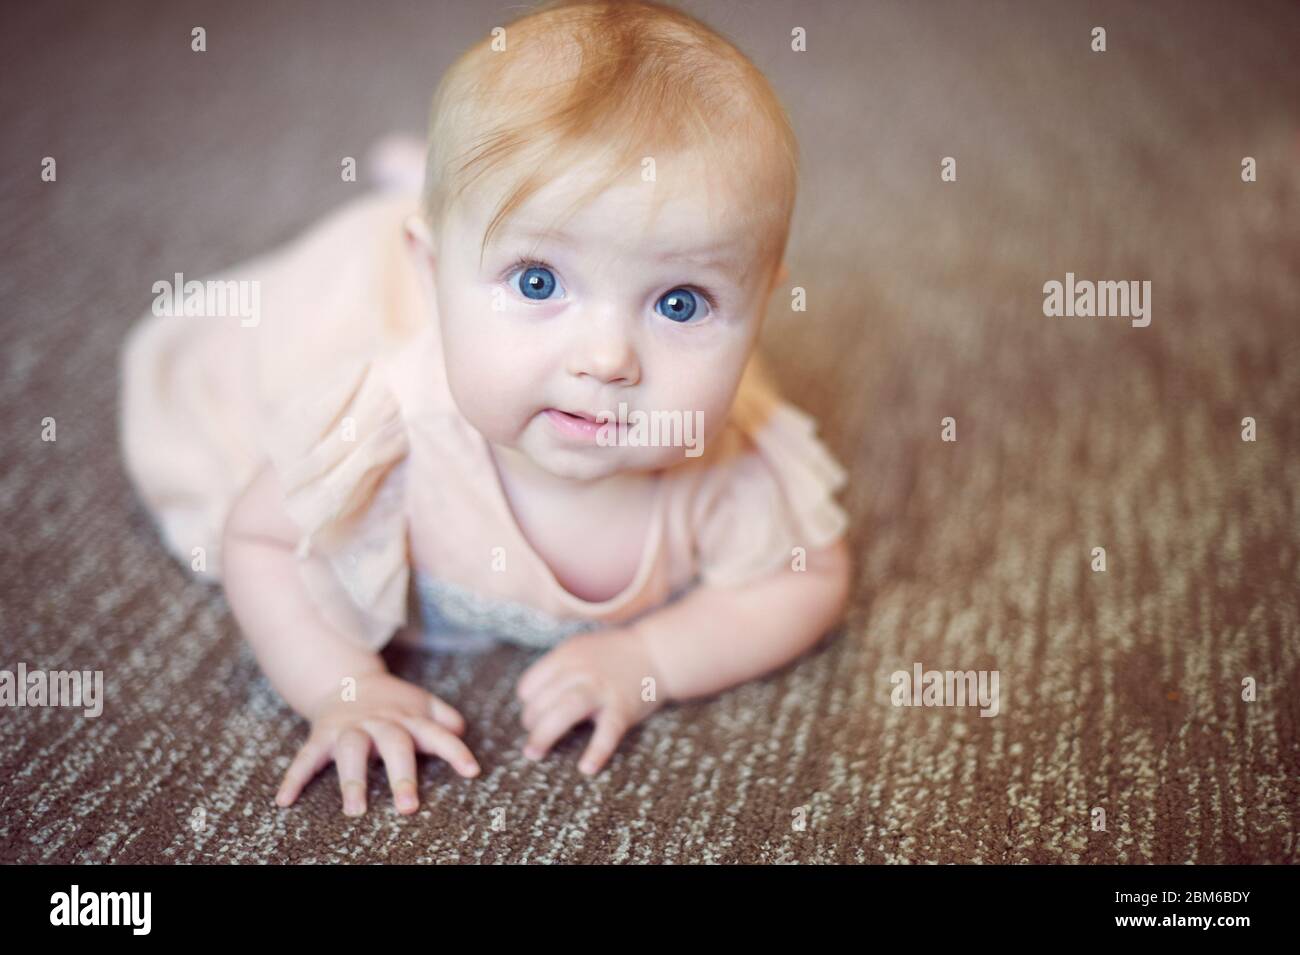 Portrait of a sweet infant baby girl wearing a pink dress in studio Stock Photo